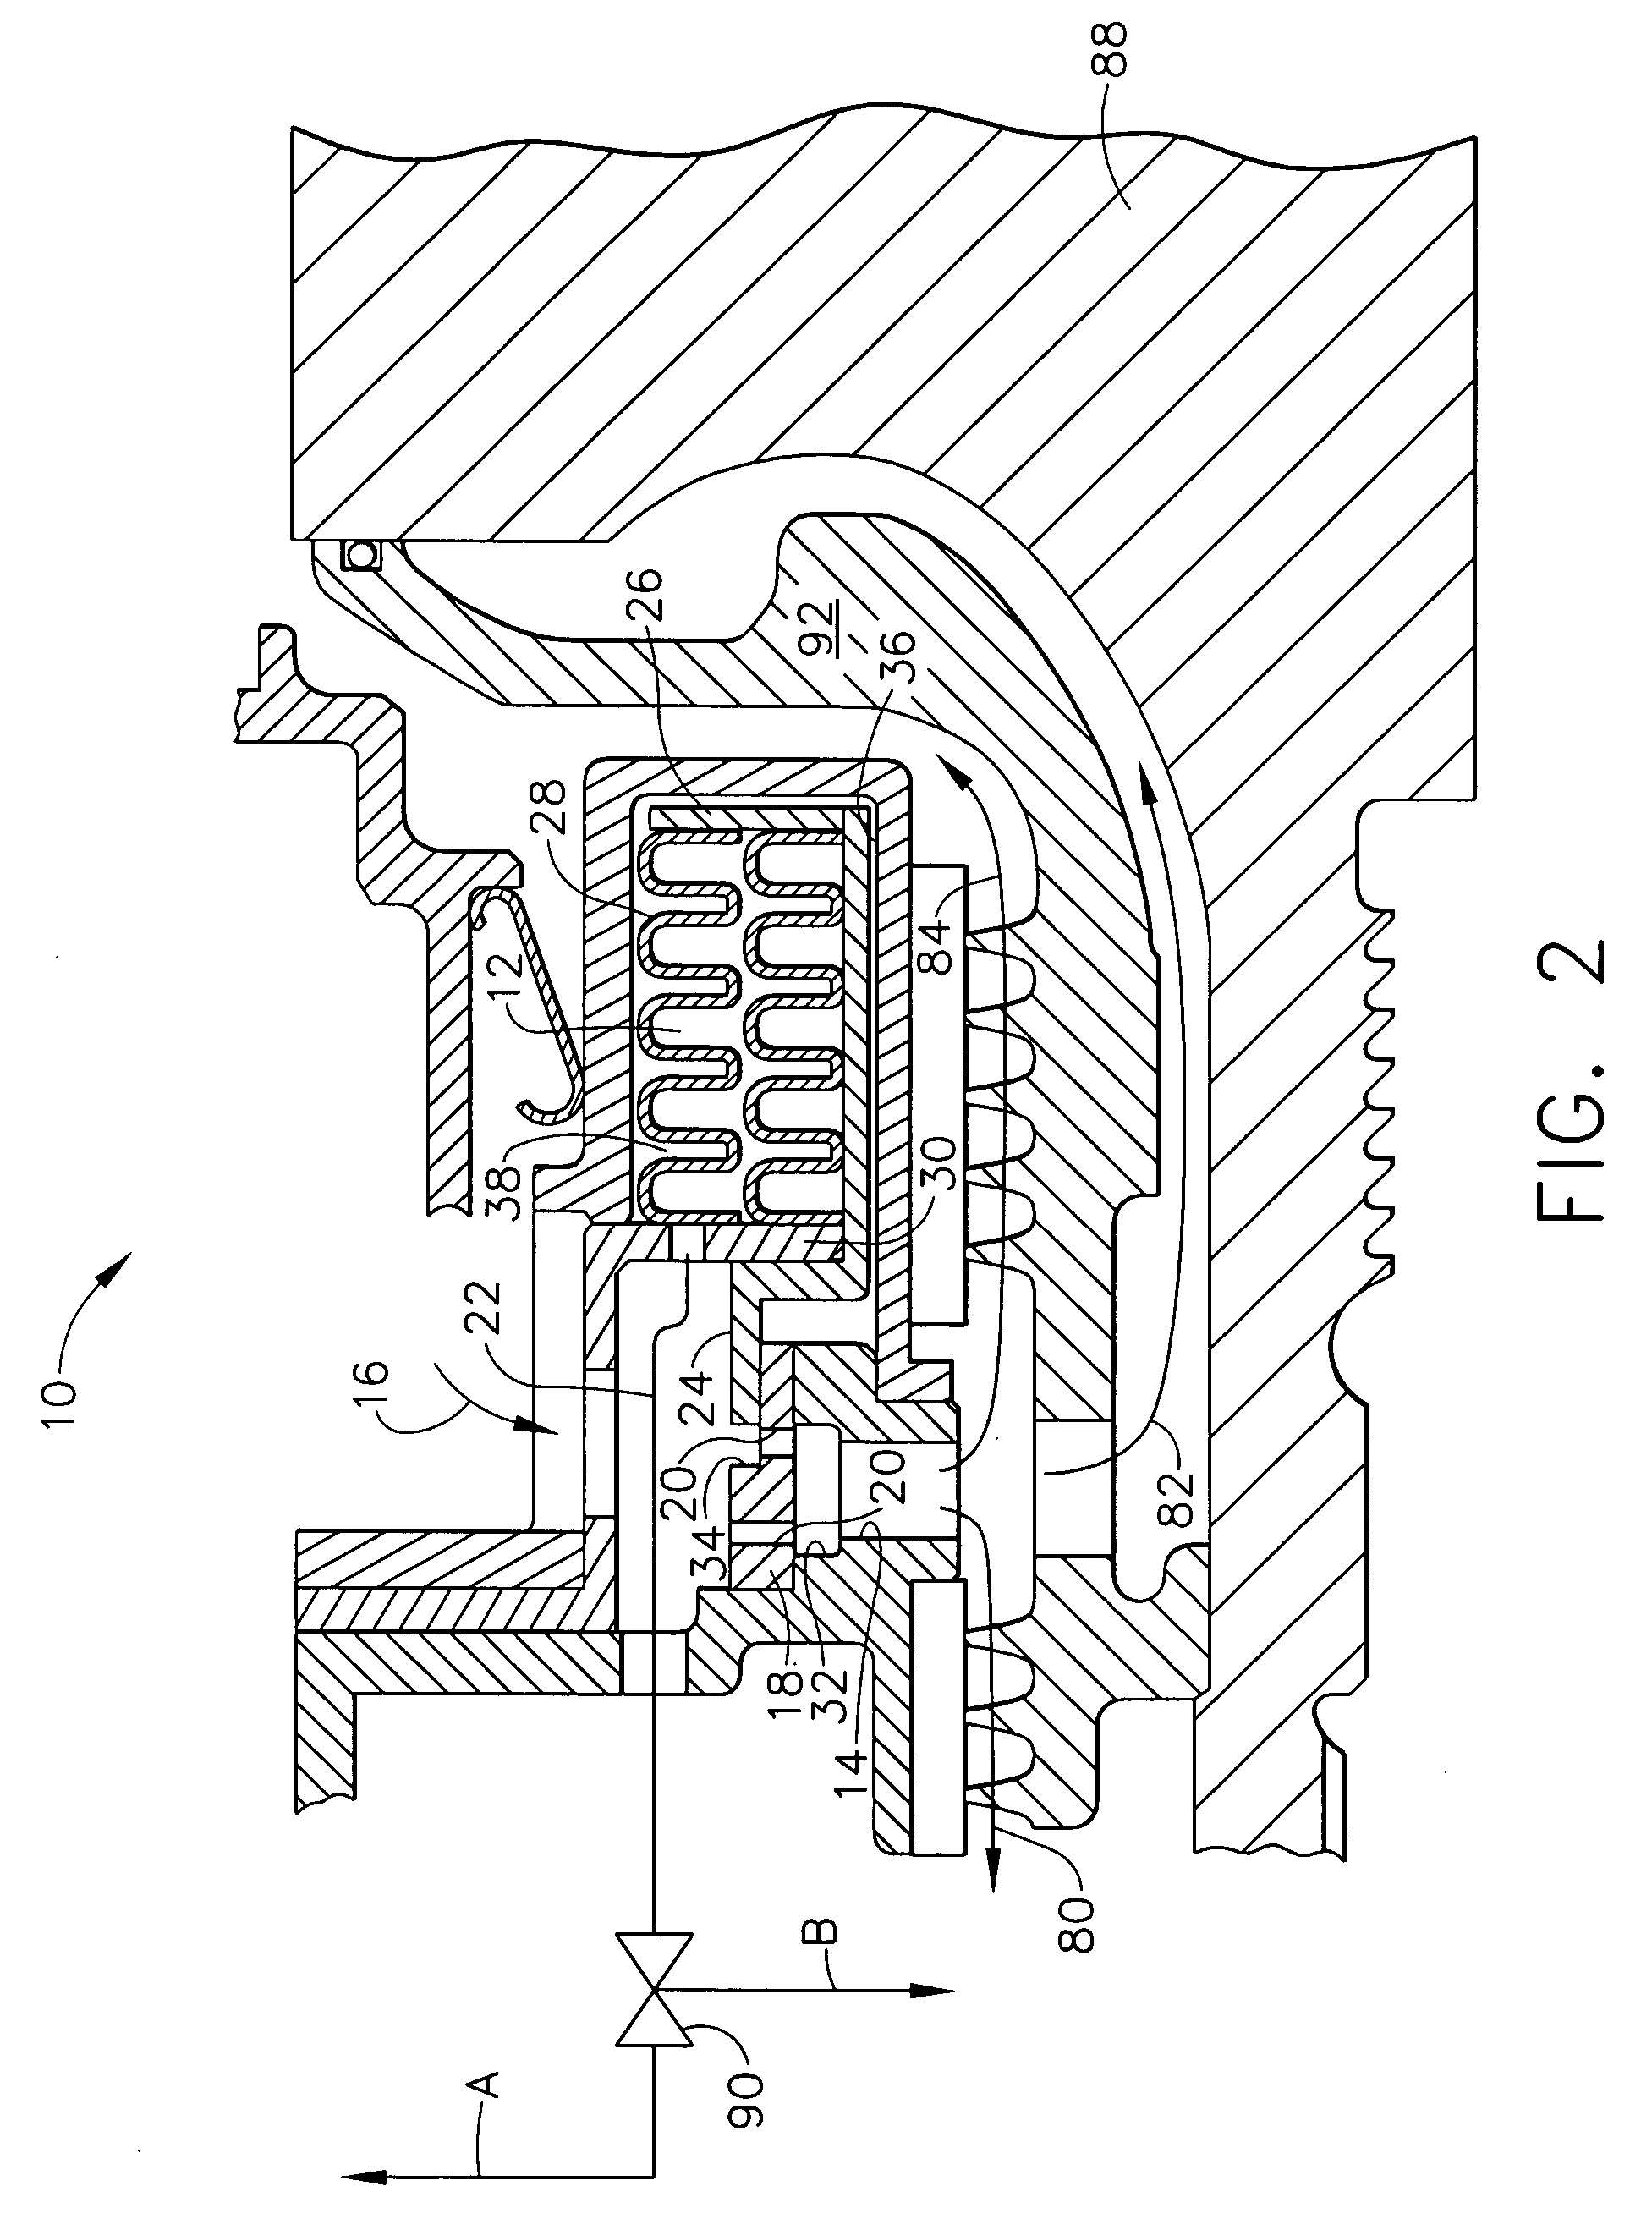 Variable turbine cooling flow system